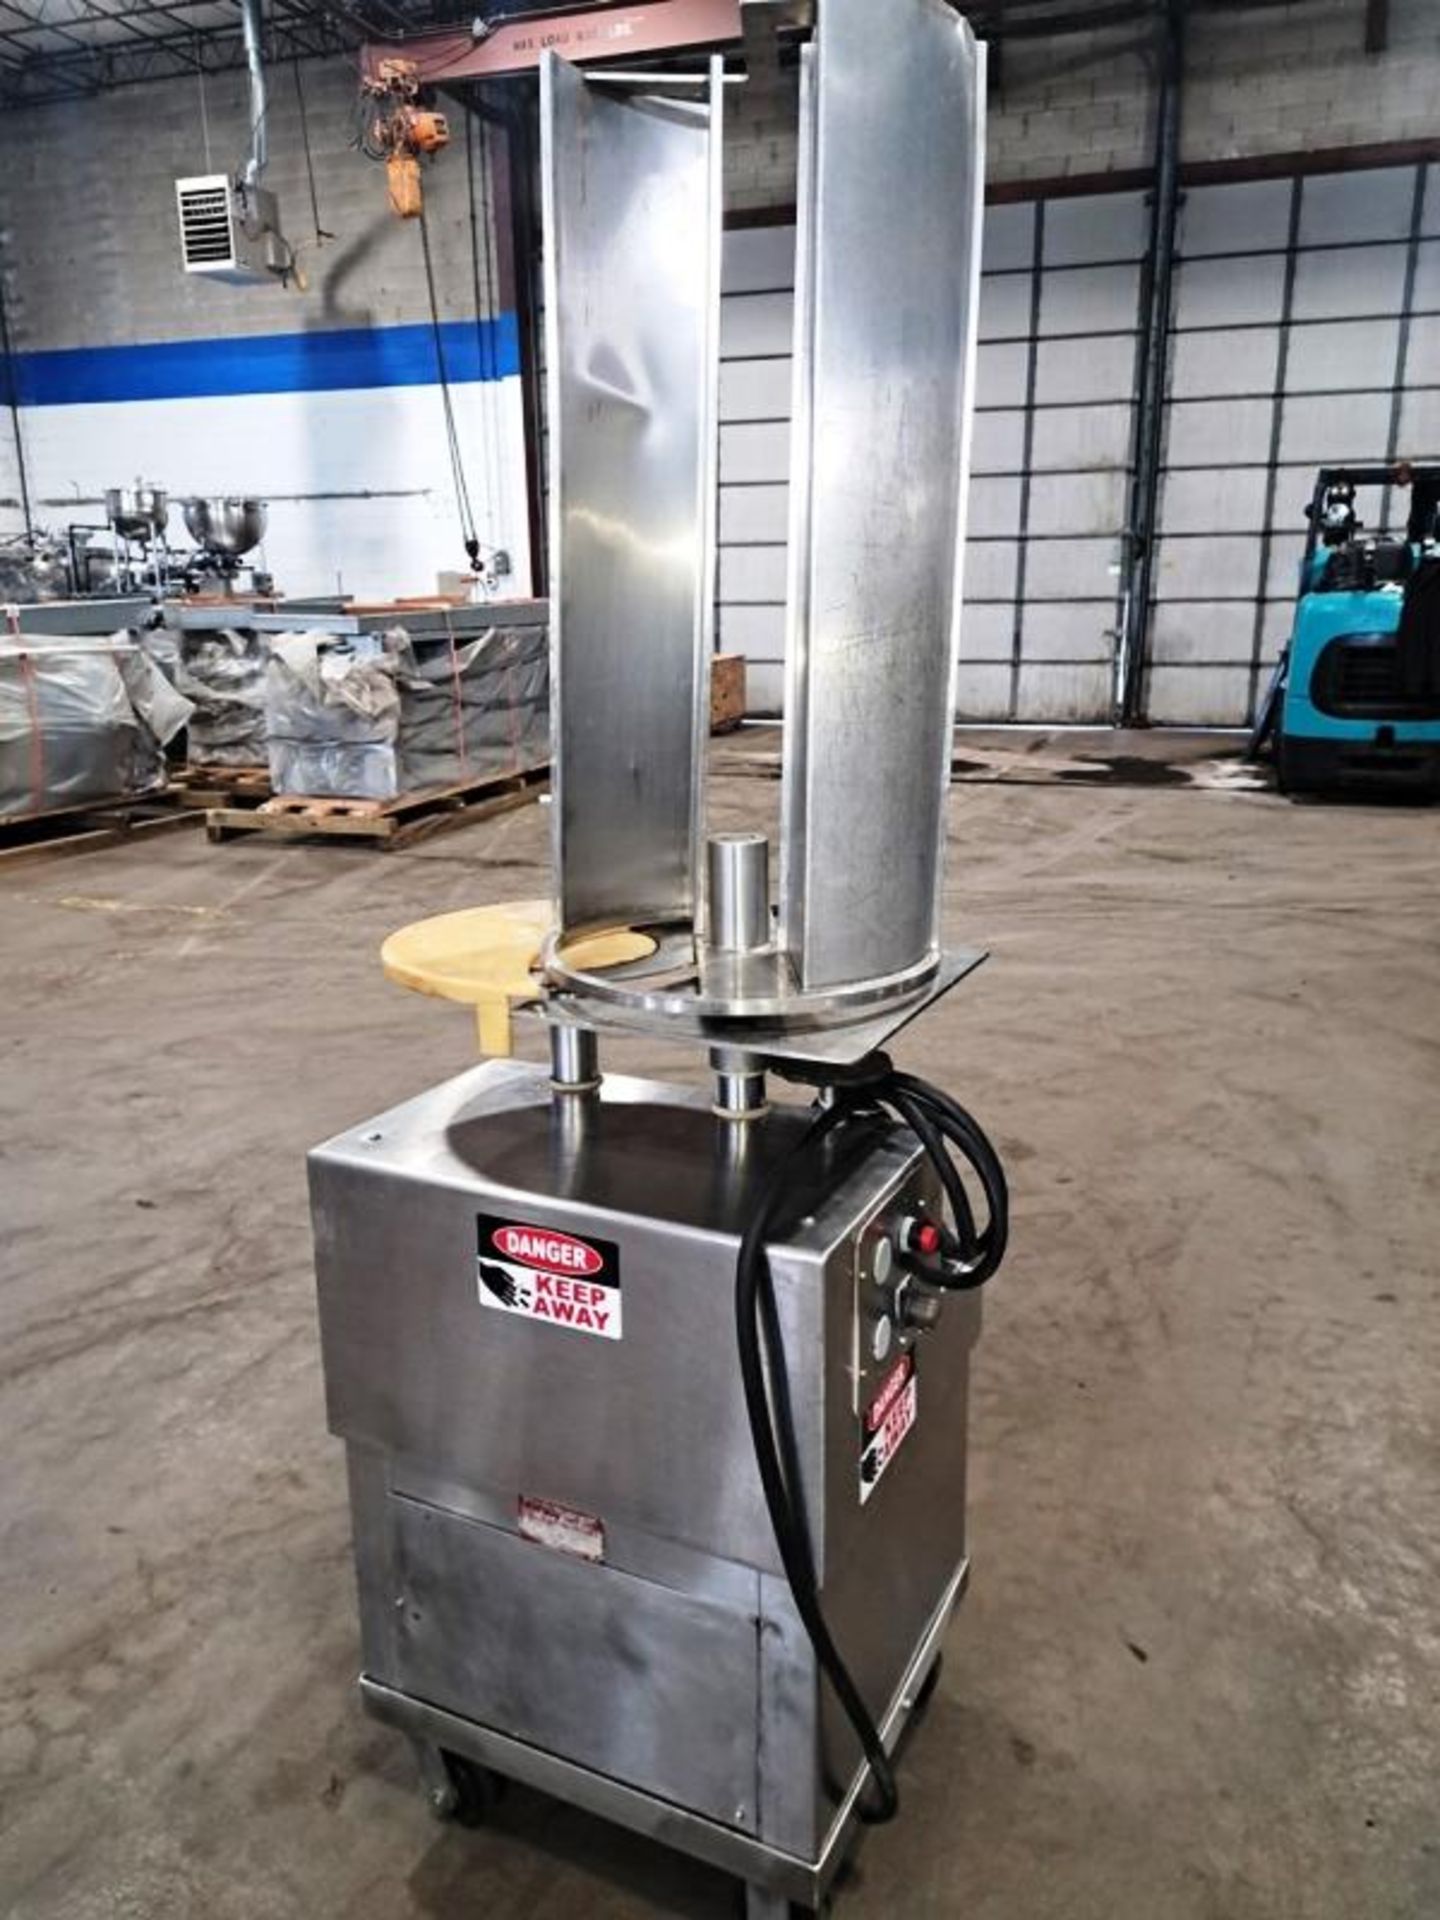 Bettcher Mdl. 39 Power Cleaver, double turret feed chute, gravity feed, stainless steel cabinet, 220 - Image 2 of 5